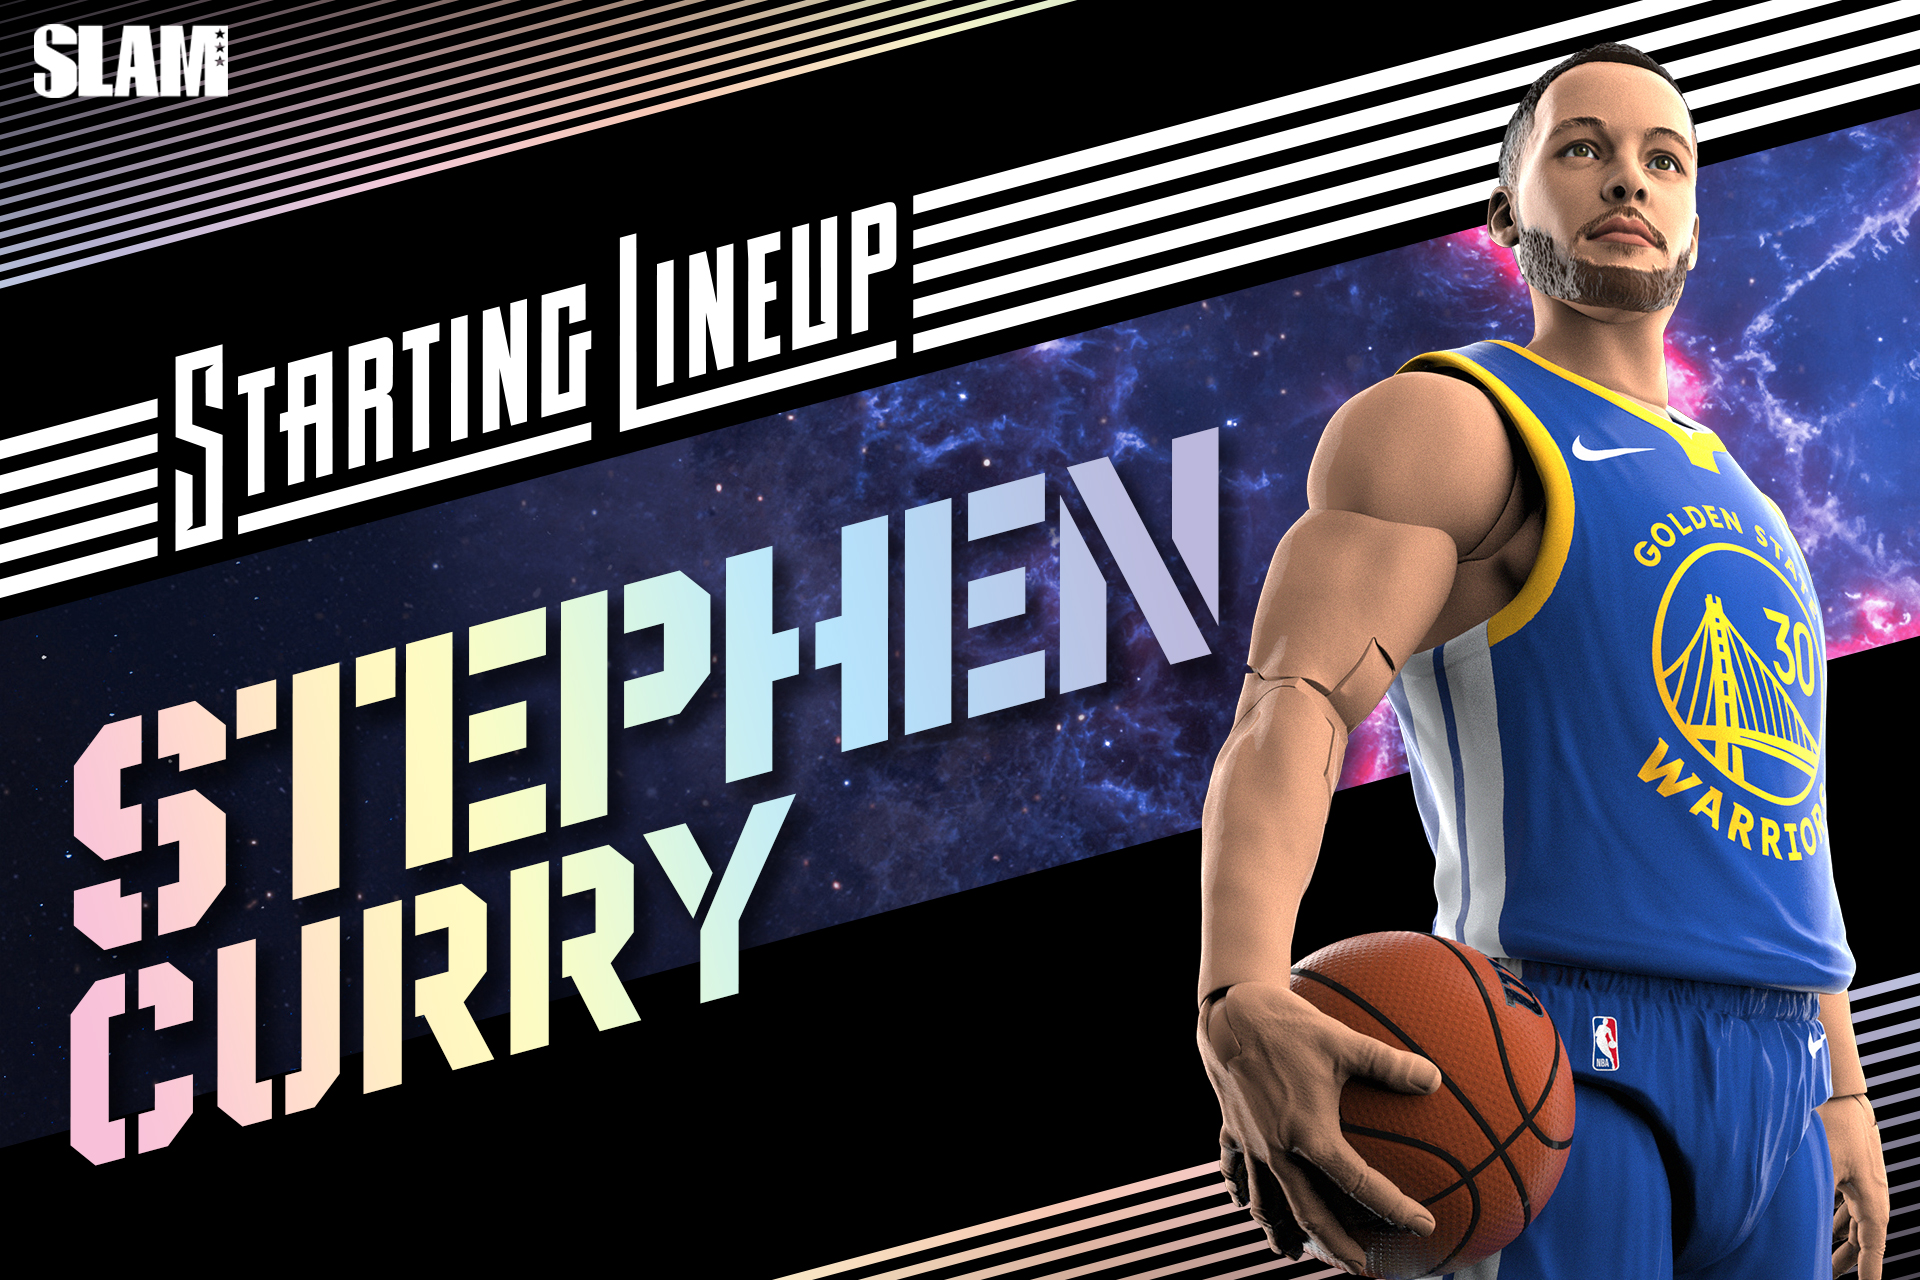 Starting Lineup’s Stephen Curry NBA Action Figure Captures the Greatest Three-Point Shooter Ever